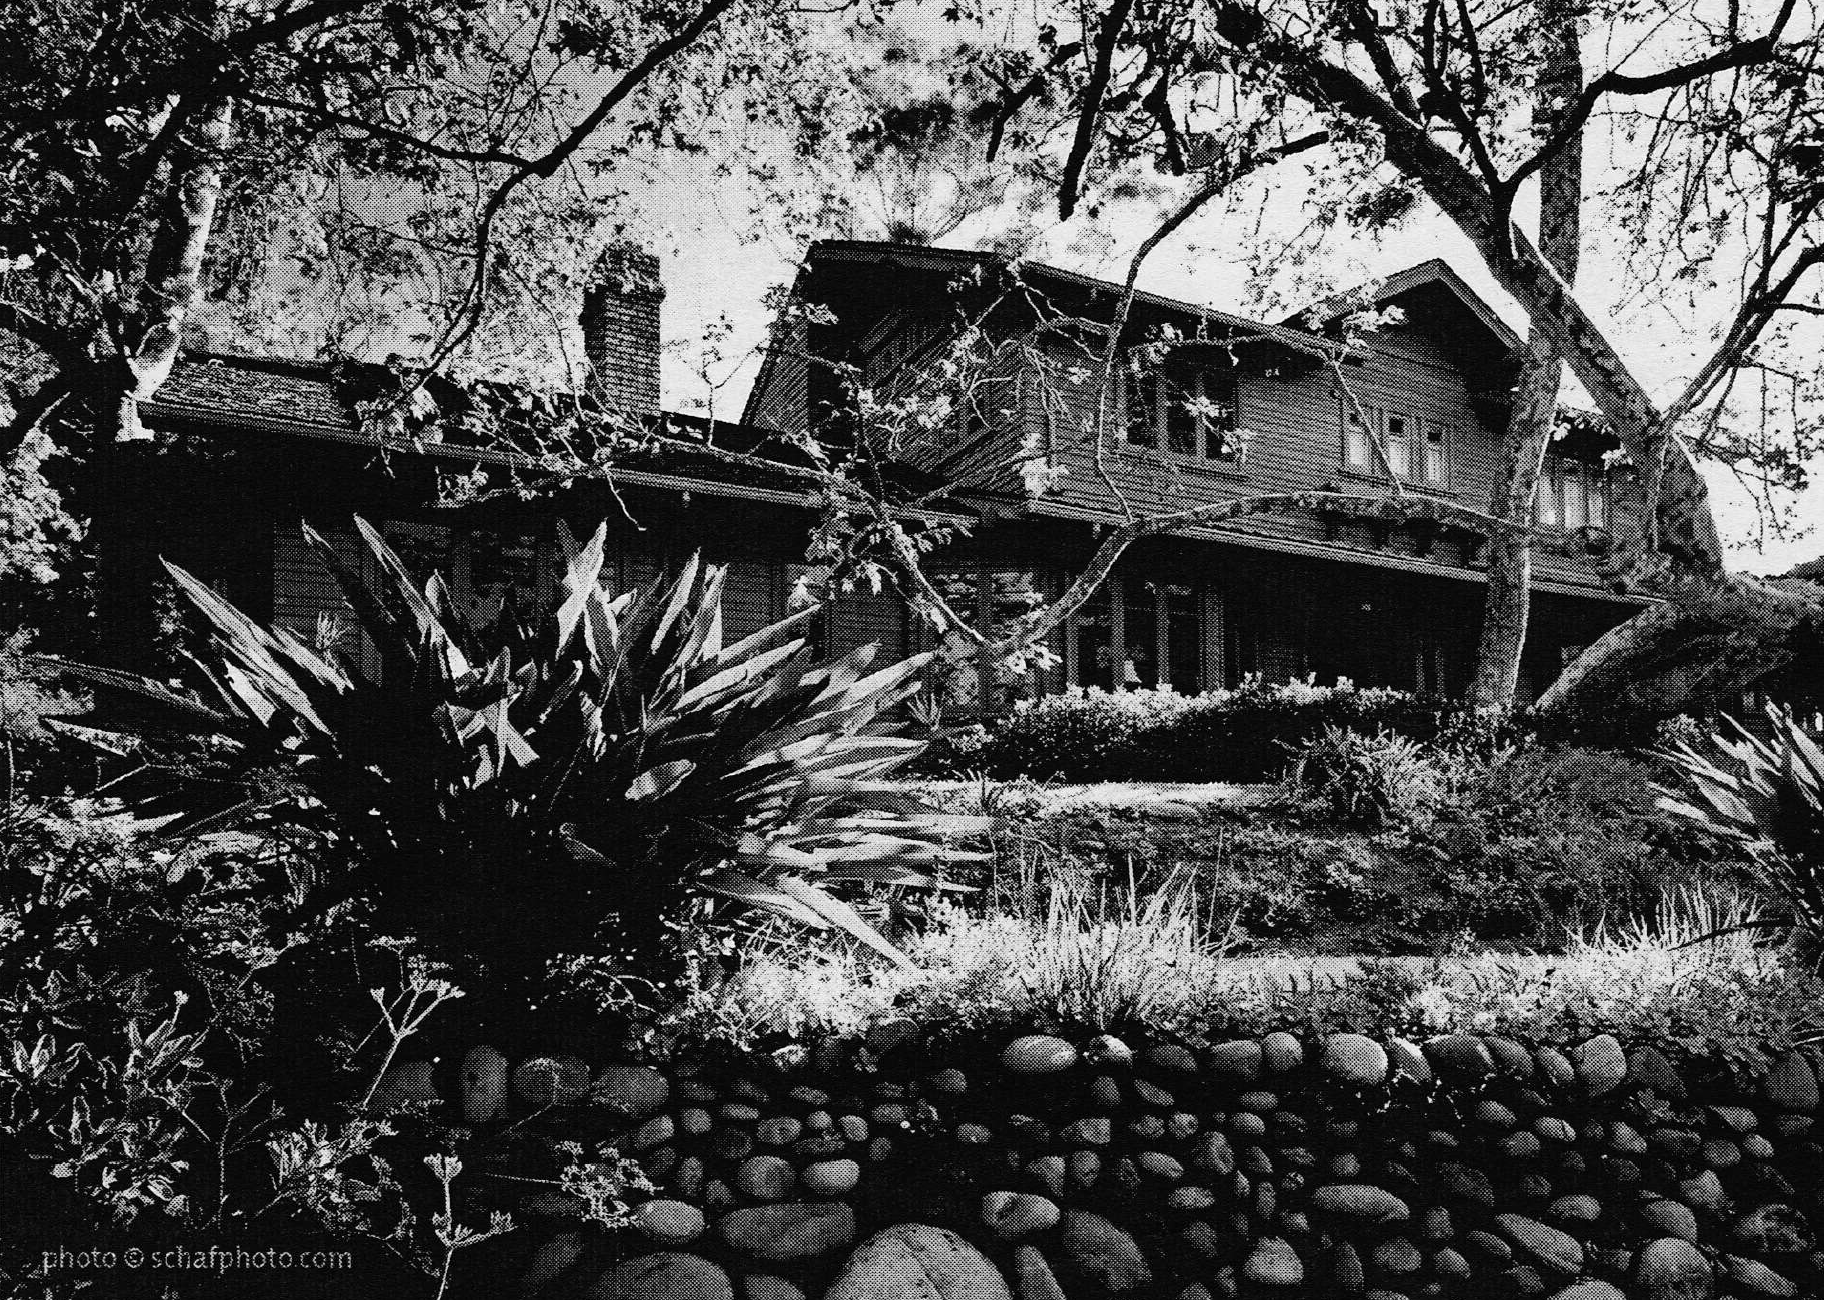 THE GOULD HOUSE: A HENRY GREENE DESIGN